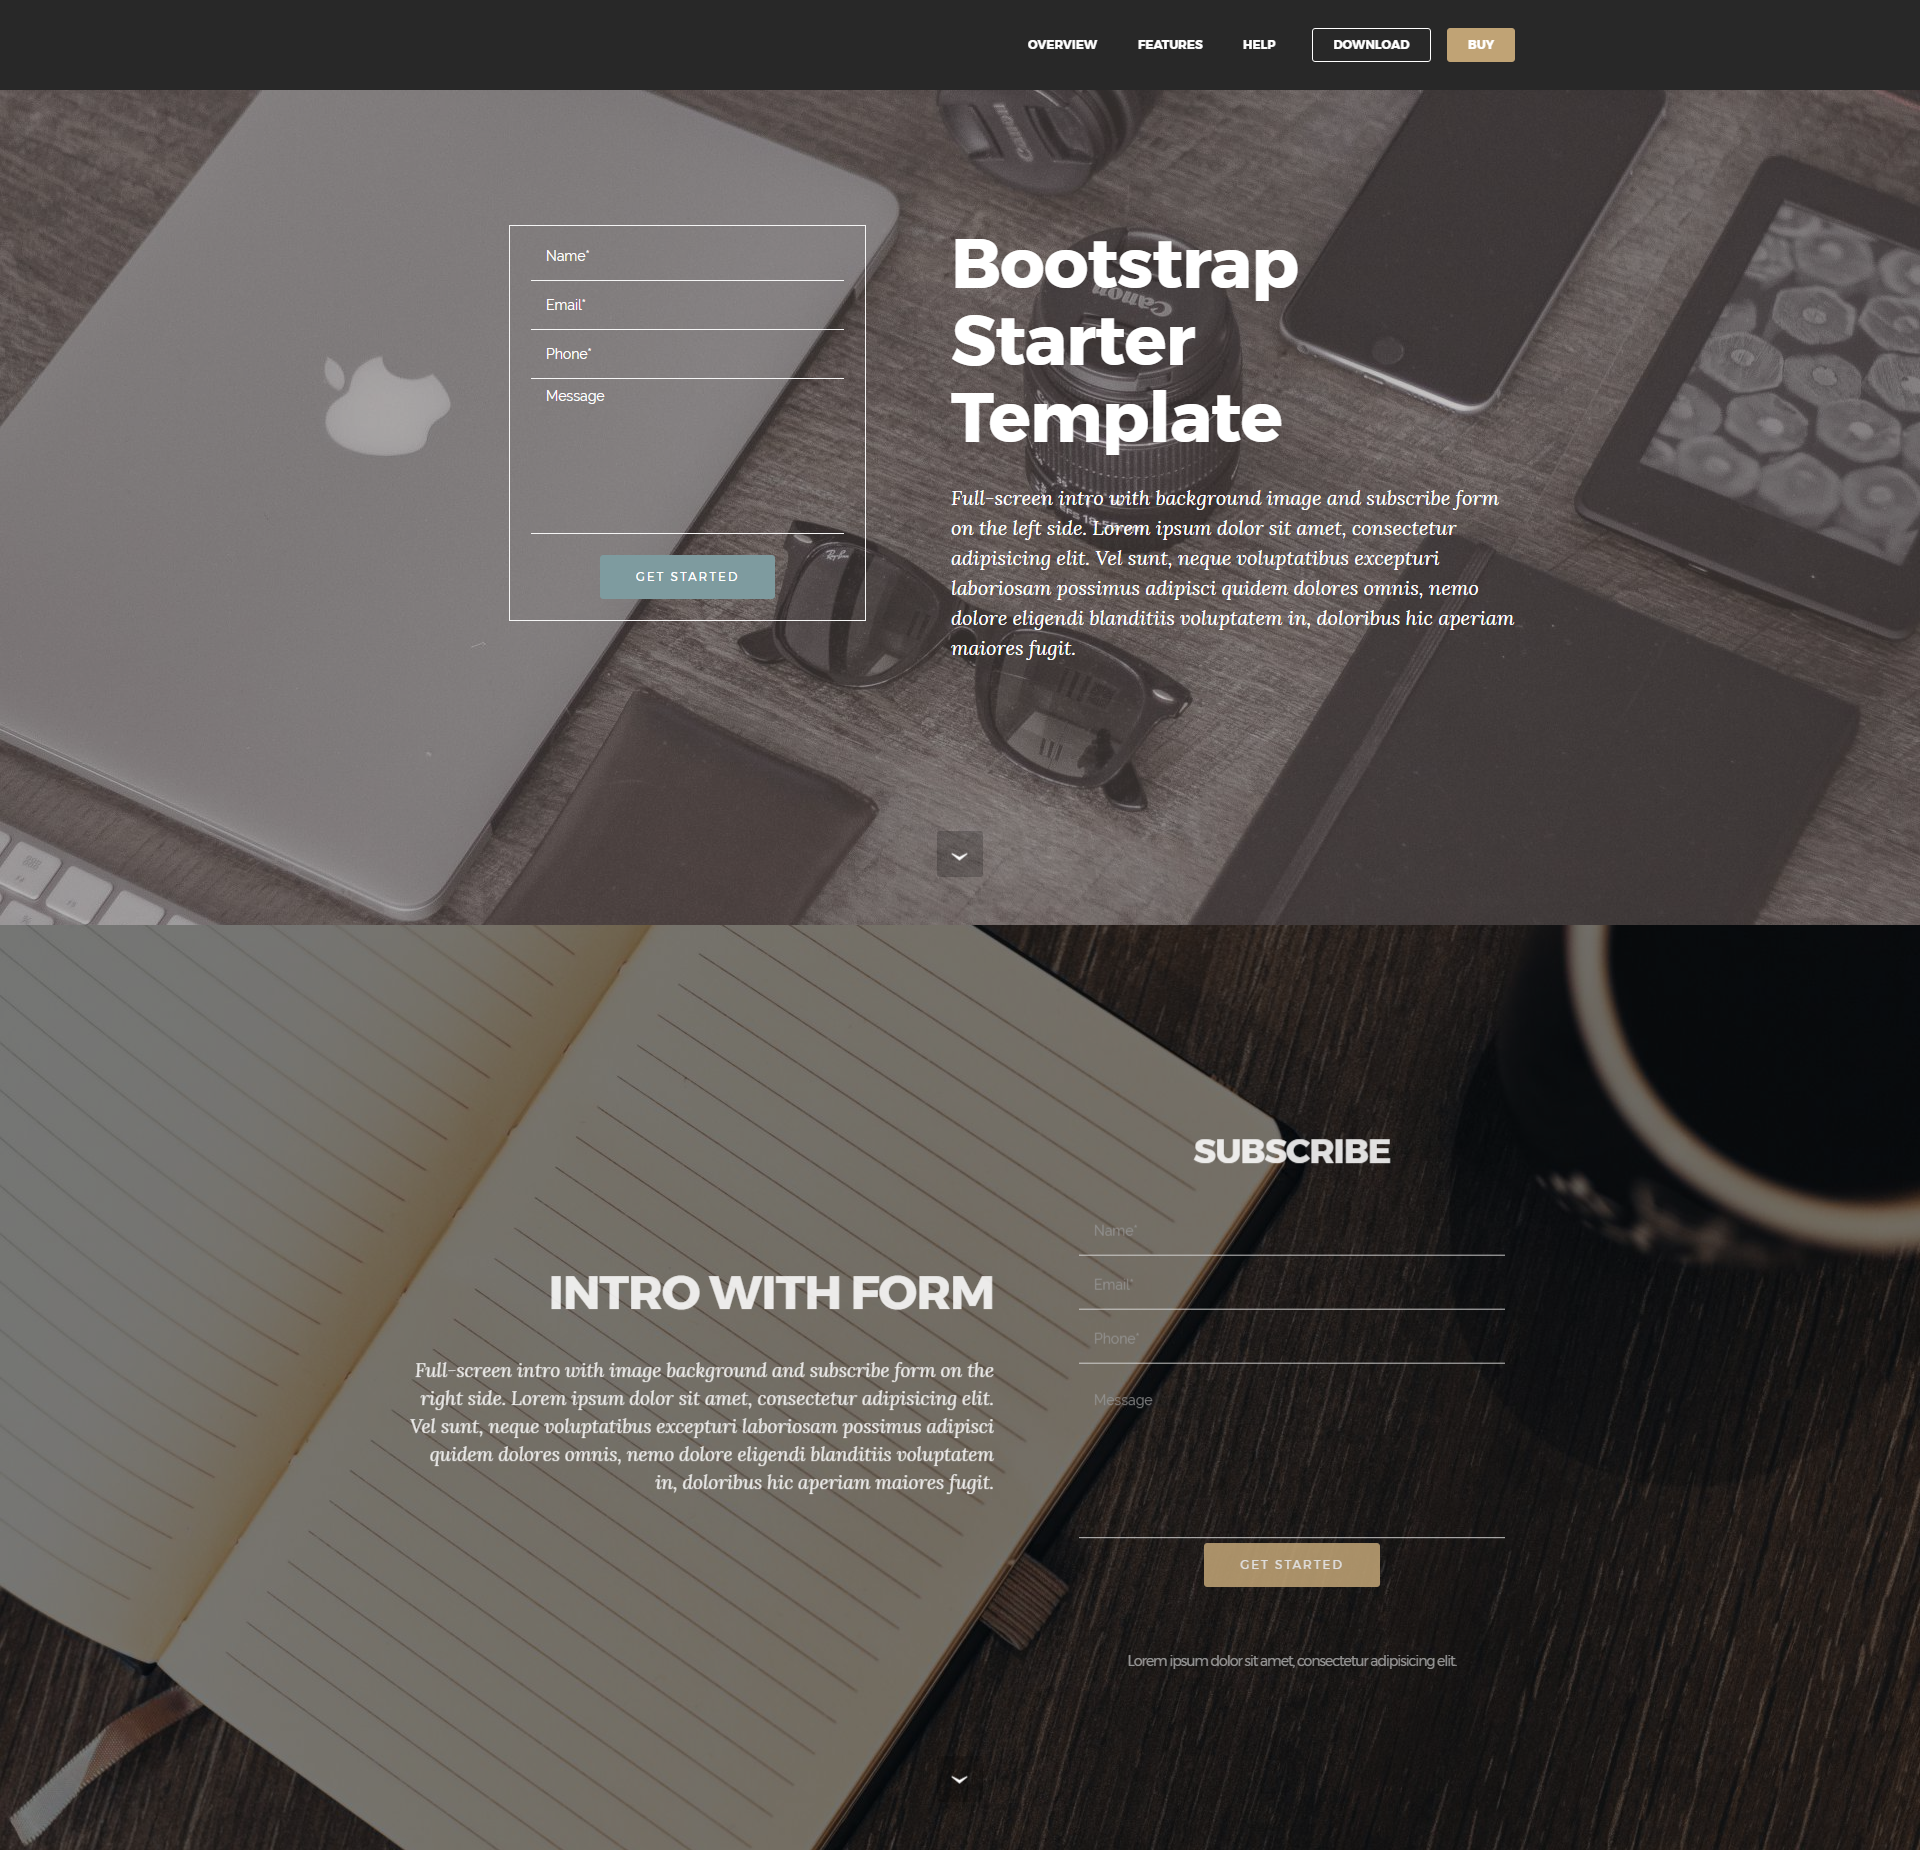 Free Bootstrap Starter Templates